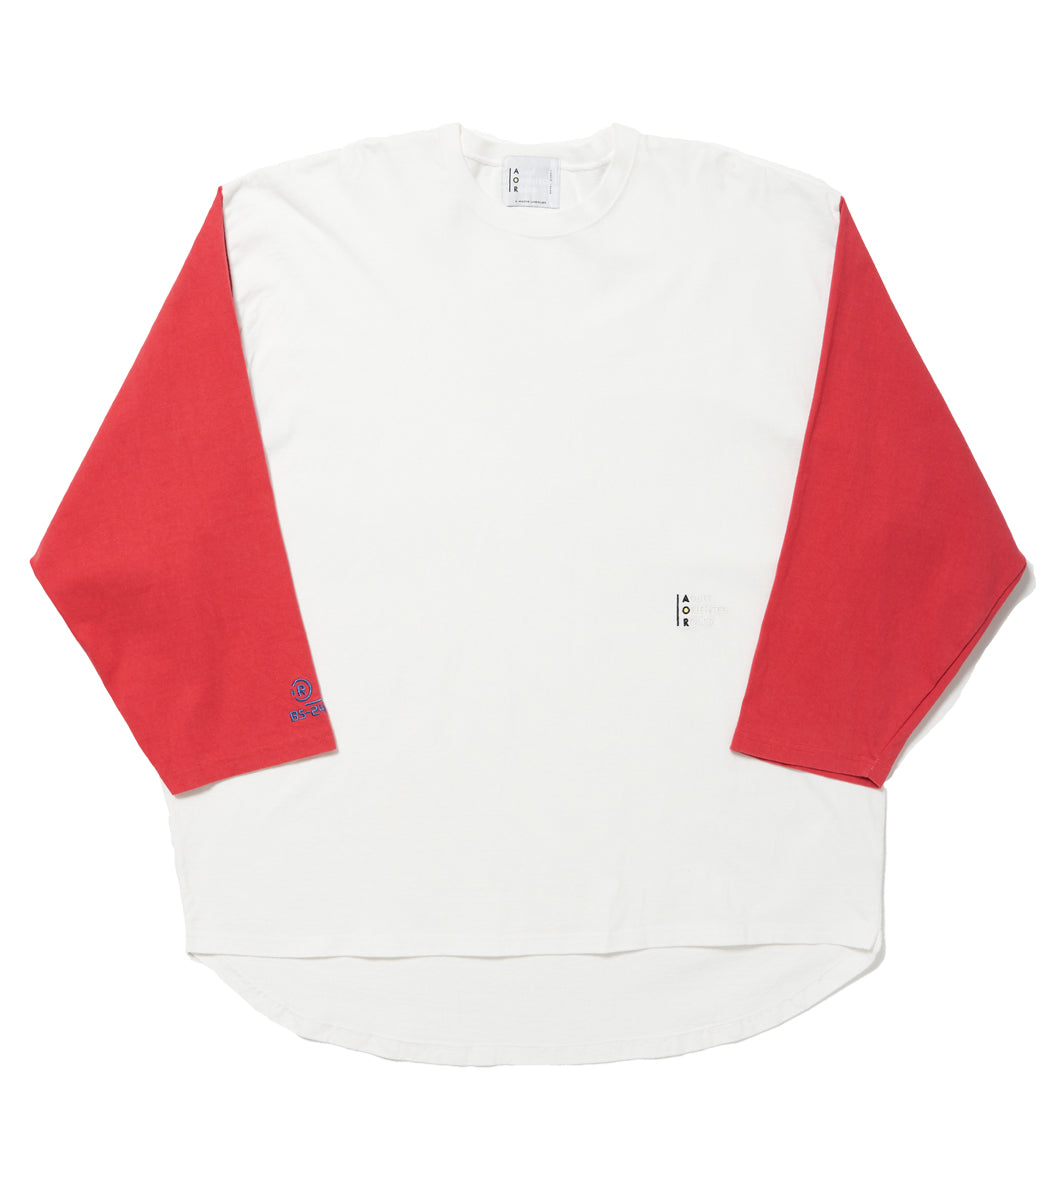 Load image into Gallery viewer, Baseball T-Shirt OFF WHITE×RED
